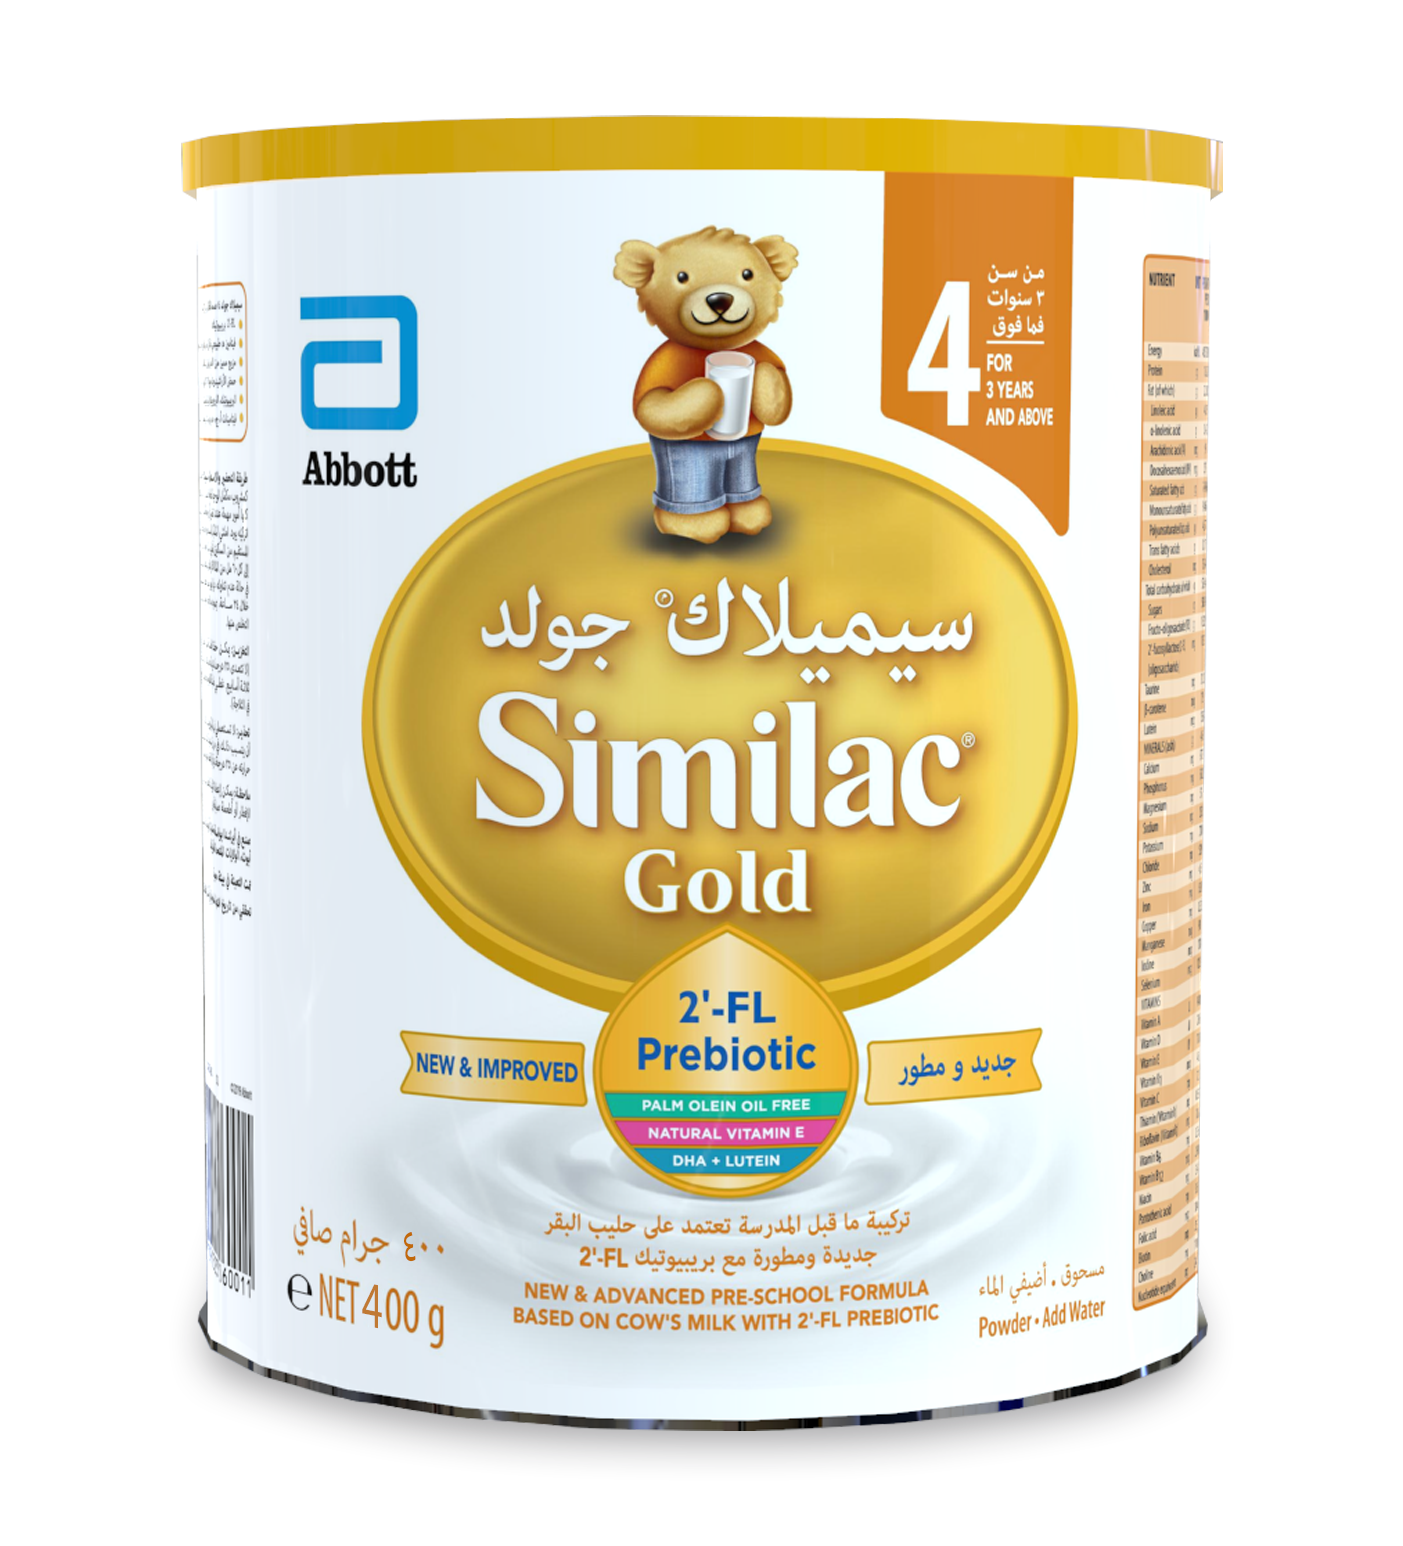 Similac_gold_4_can_product